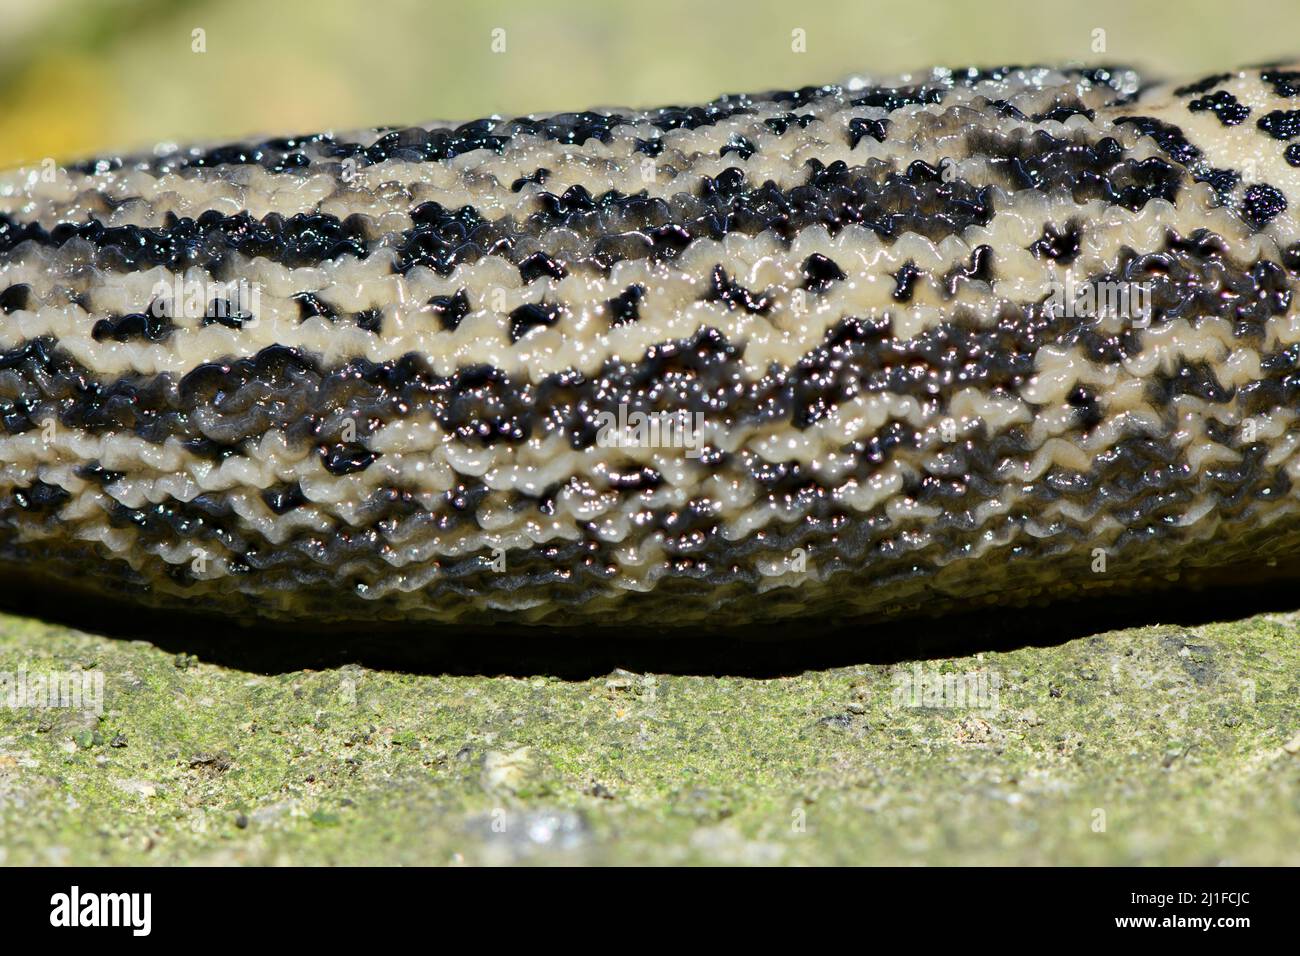 Close-up photo of leopard slug, also known as Limax Maximus. High resolution photo. Full depth of field. Stock Photo